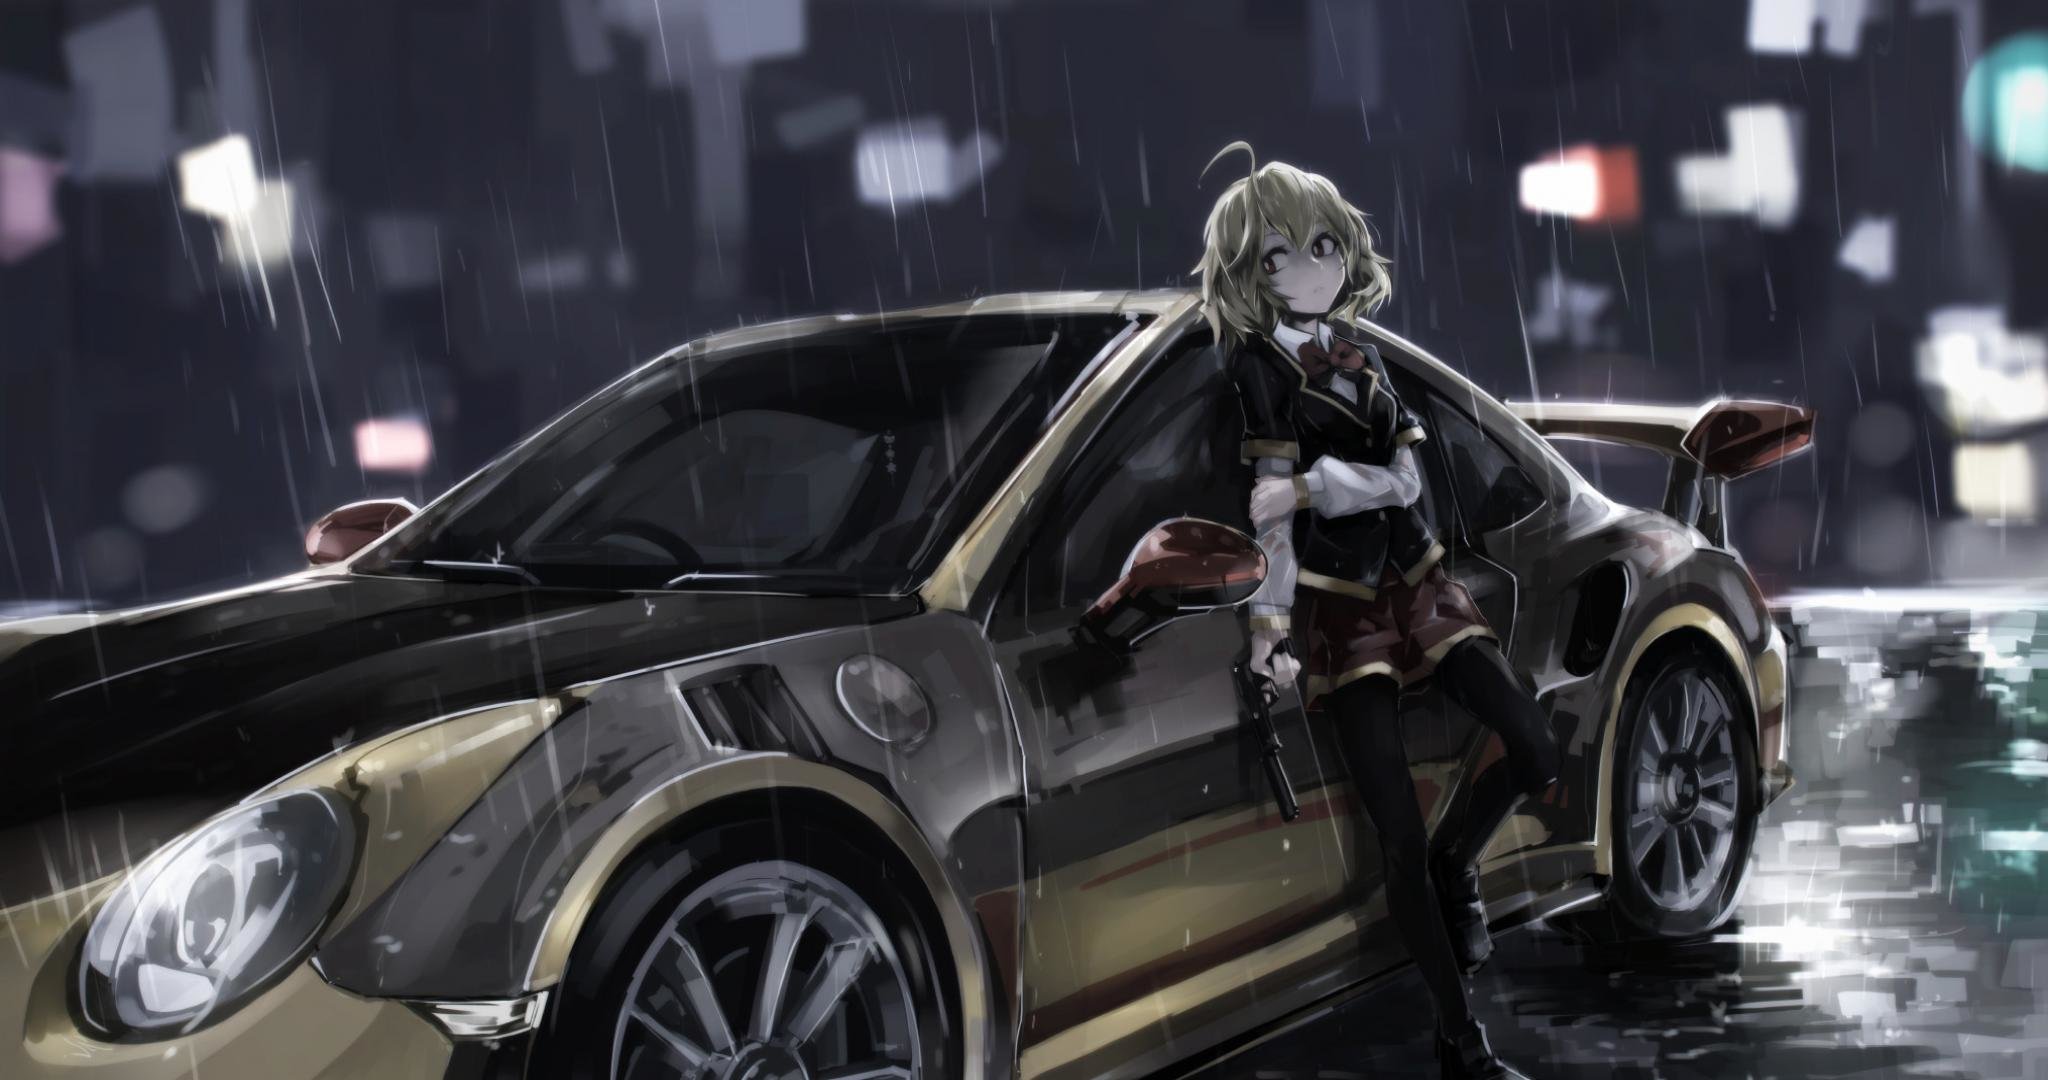 Best Riddle Story Of Devil (Akuma No Riddle) background ID:328329 for High Resolution hd 2048x1080 PC